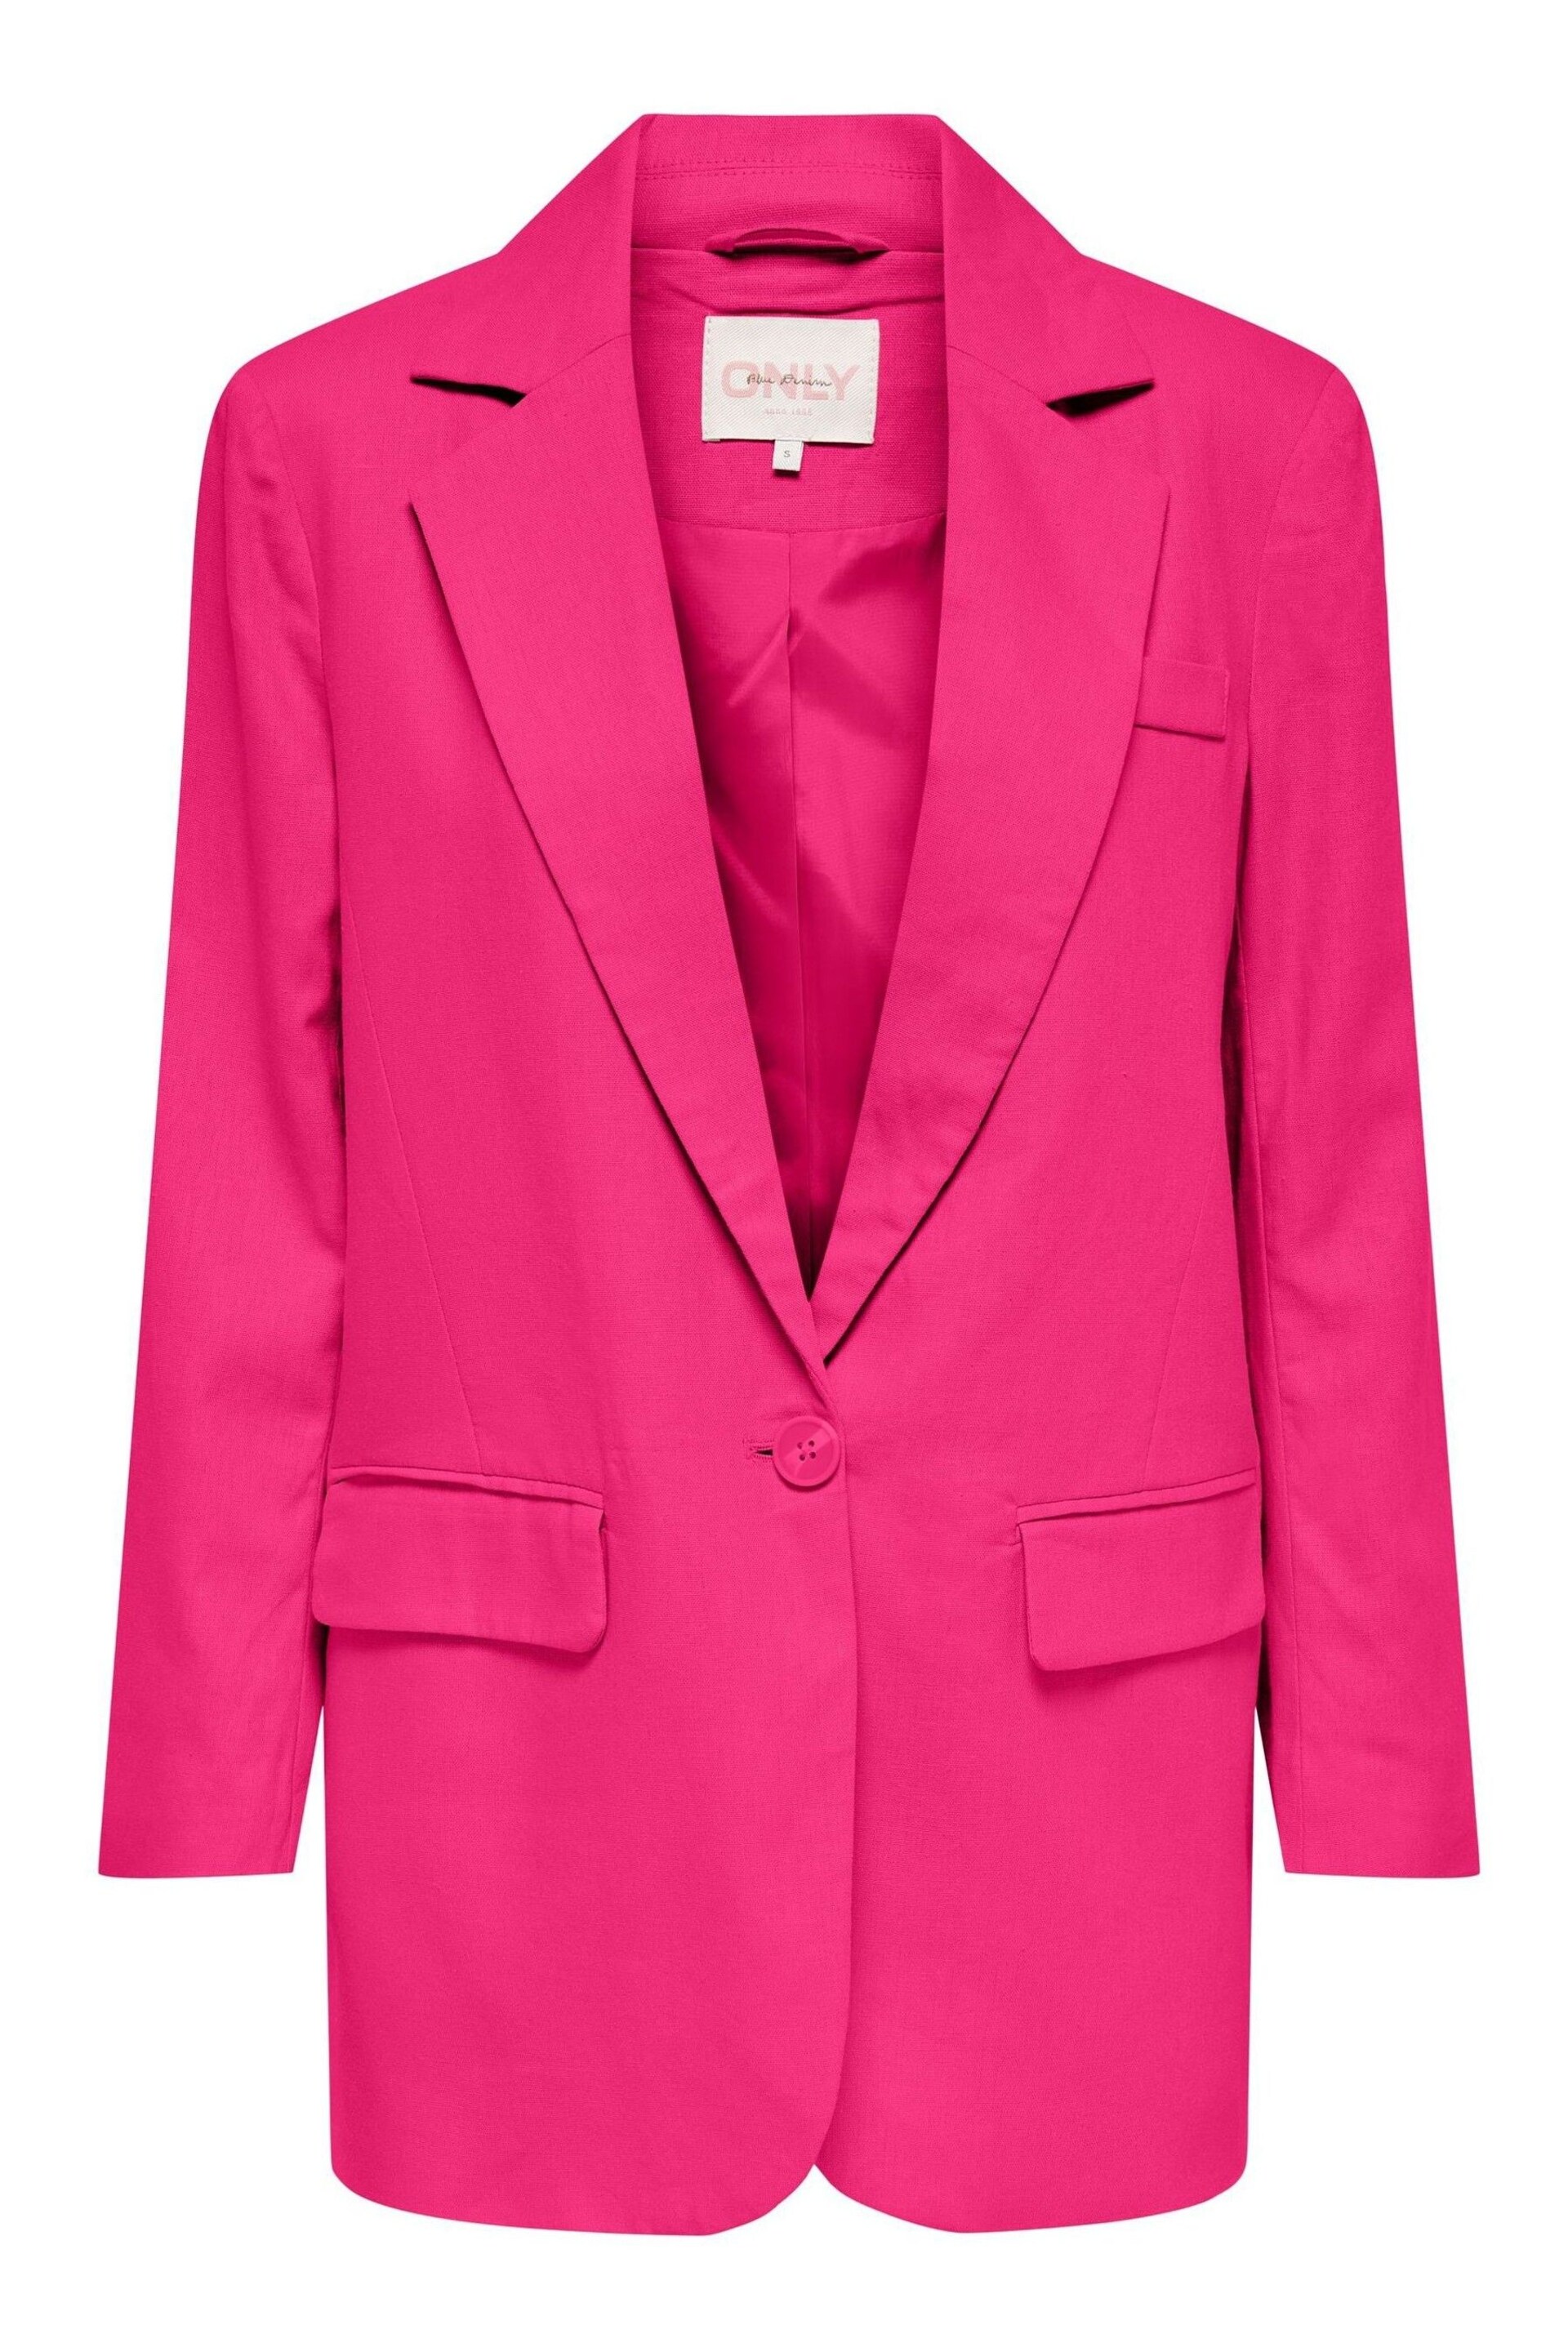 ONLY Pink Linen Blend Tailored Blazer - Image 1 of 2